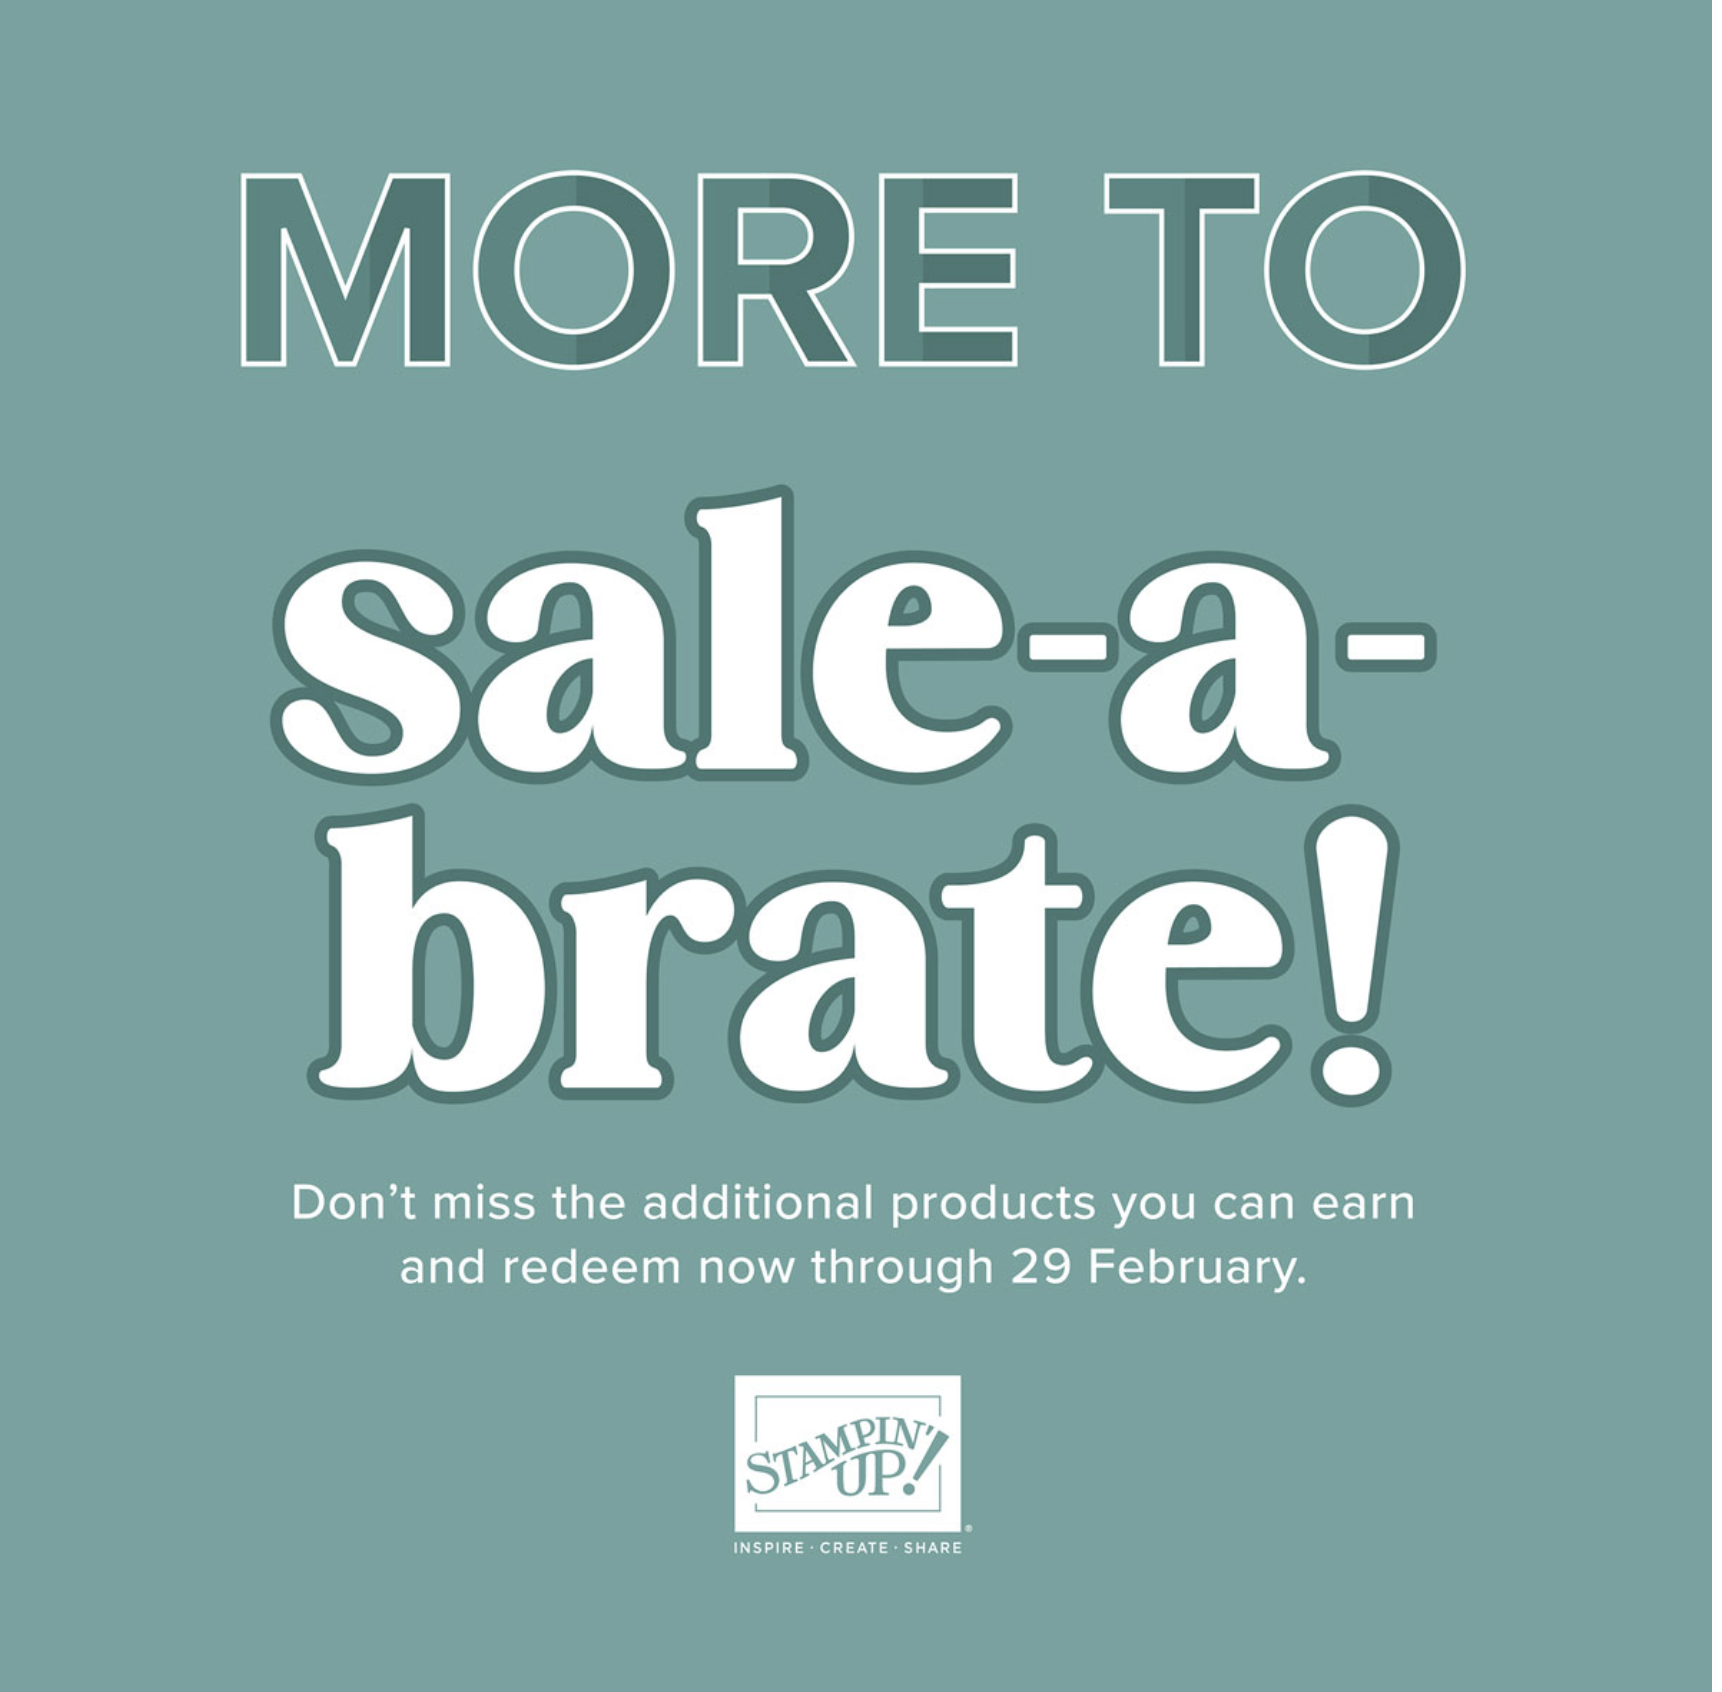 More to Sale-a-Brate